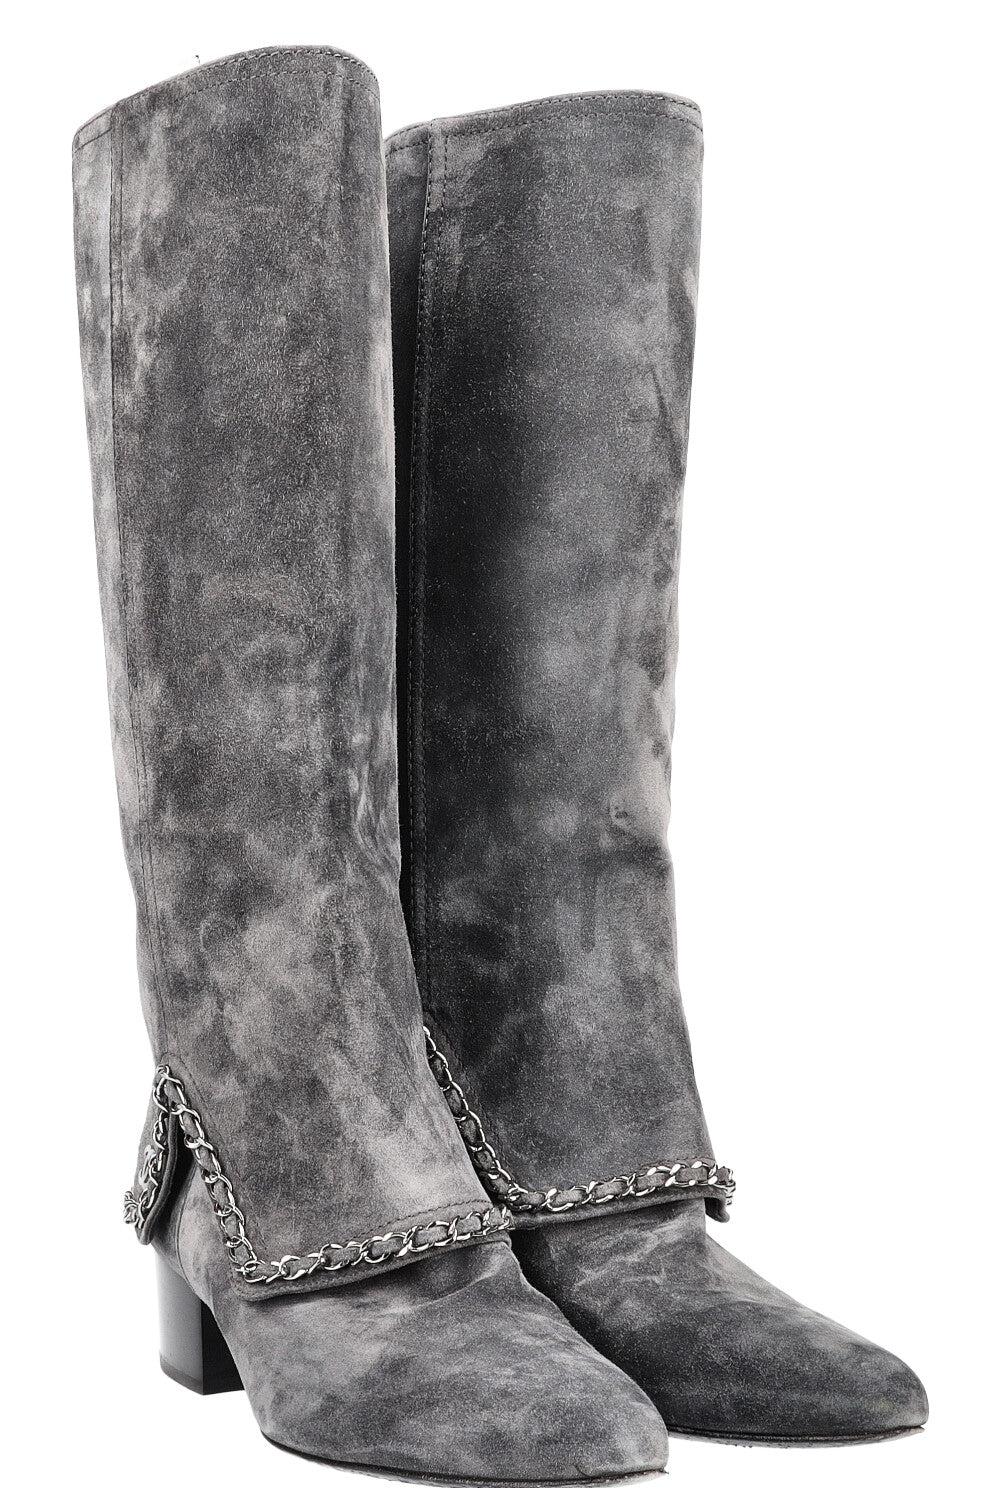 CHANEL Boots with Chain Suede Grey